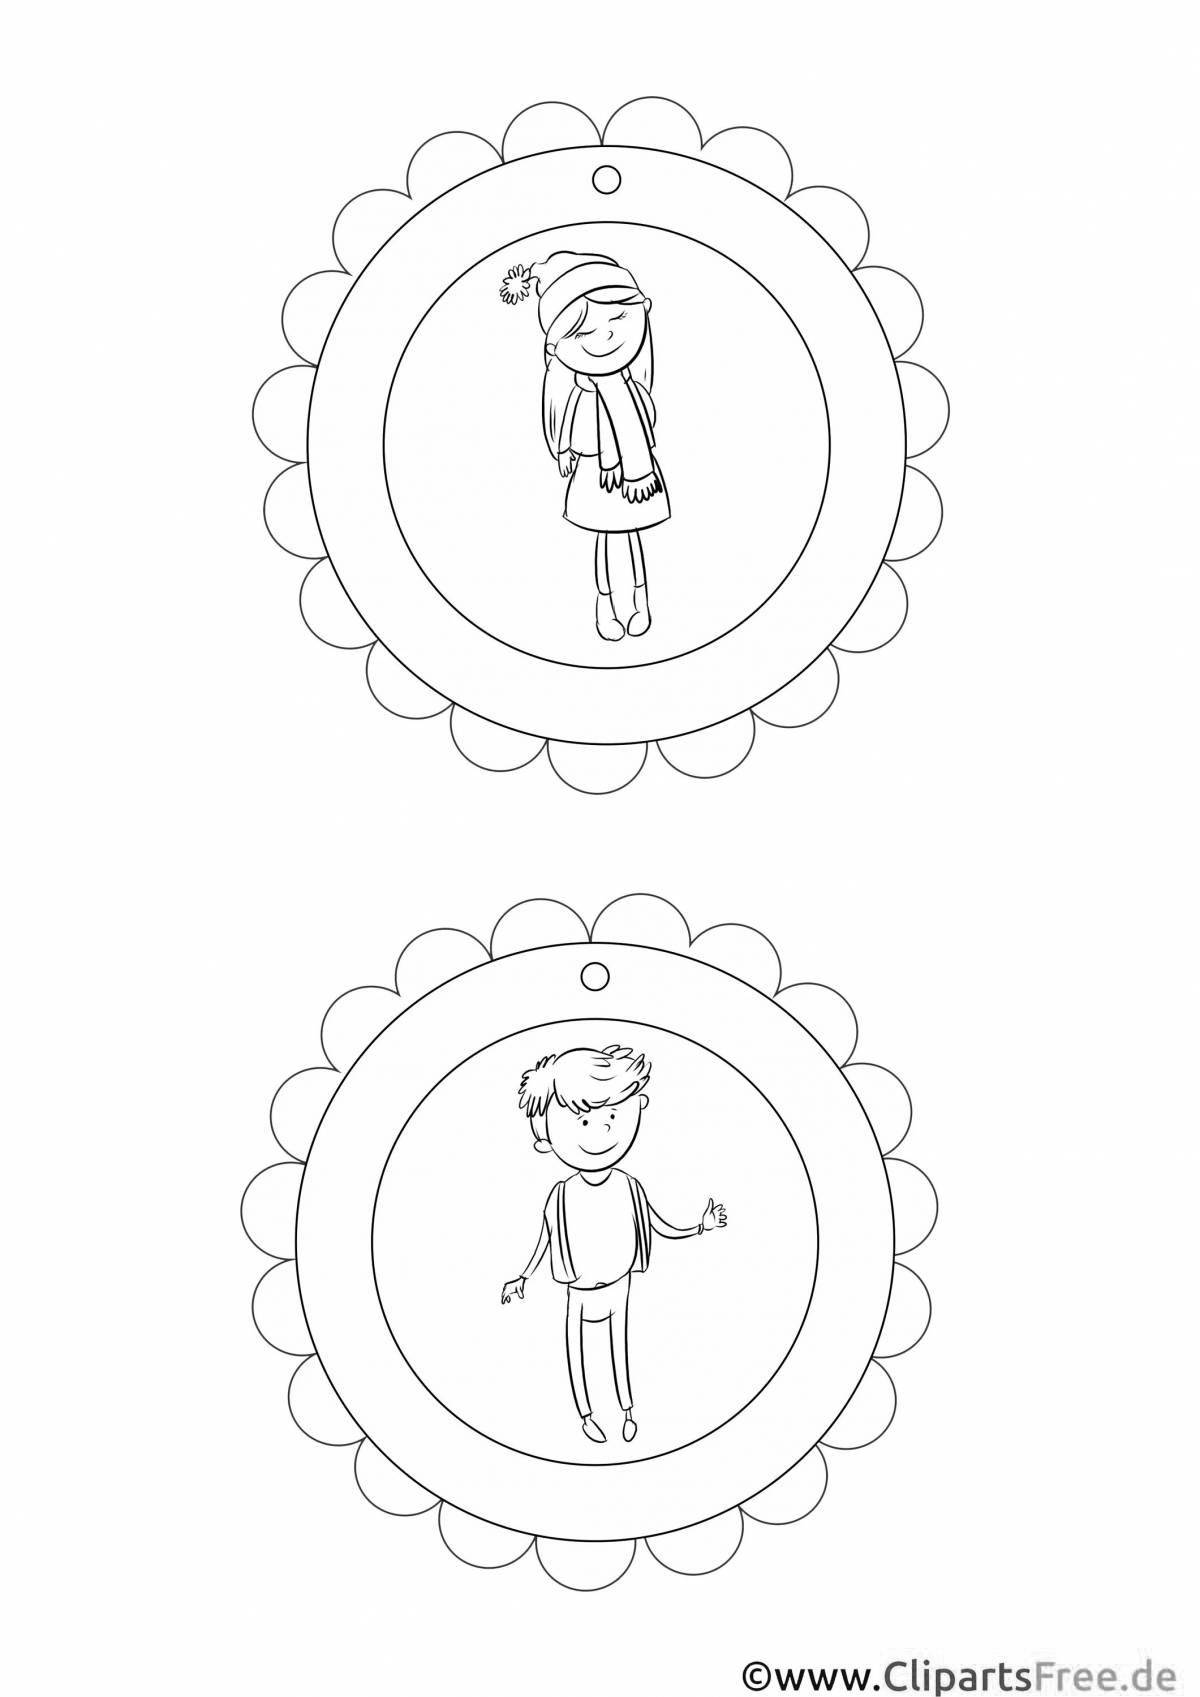 Ornate medal coloring page